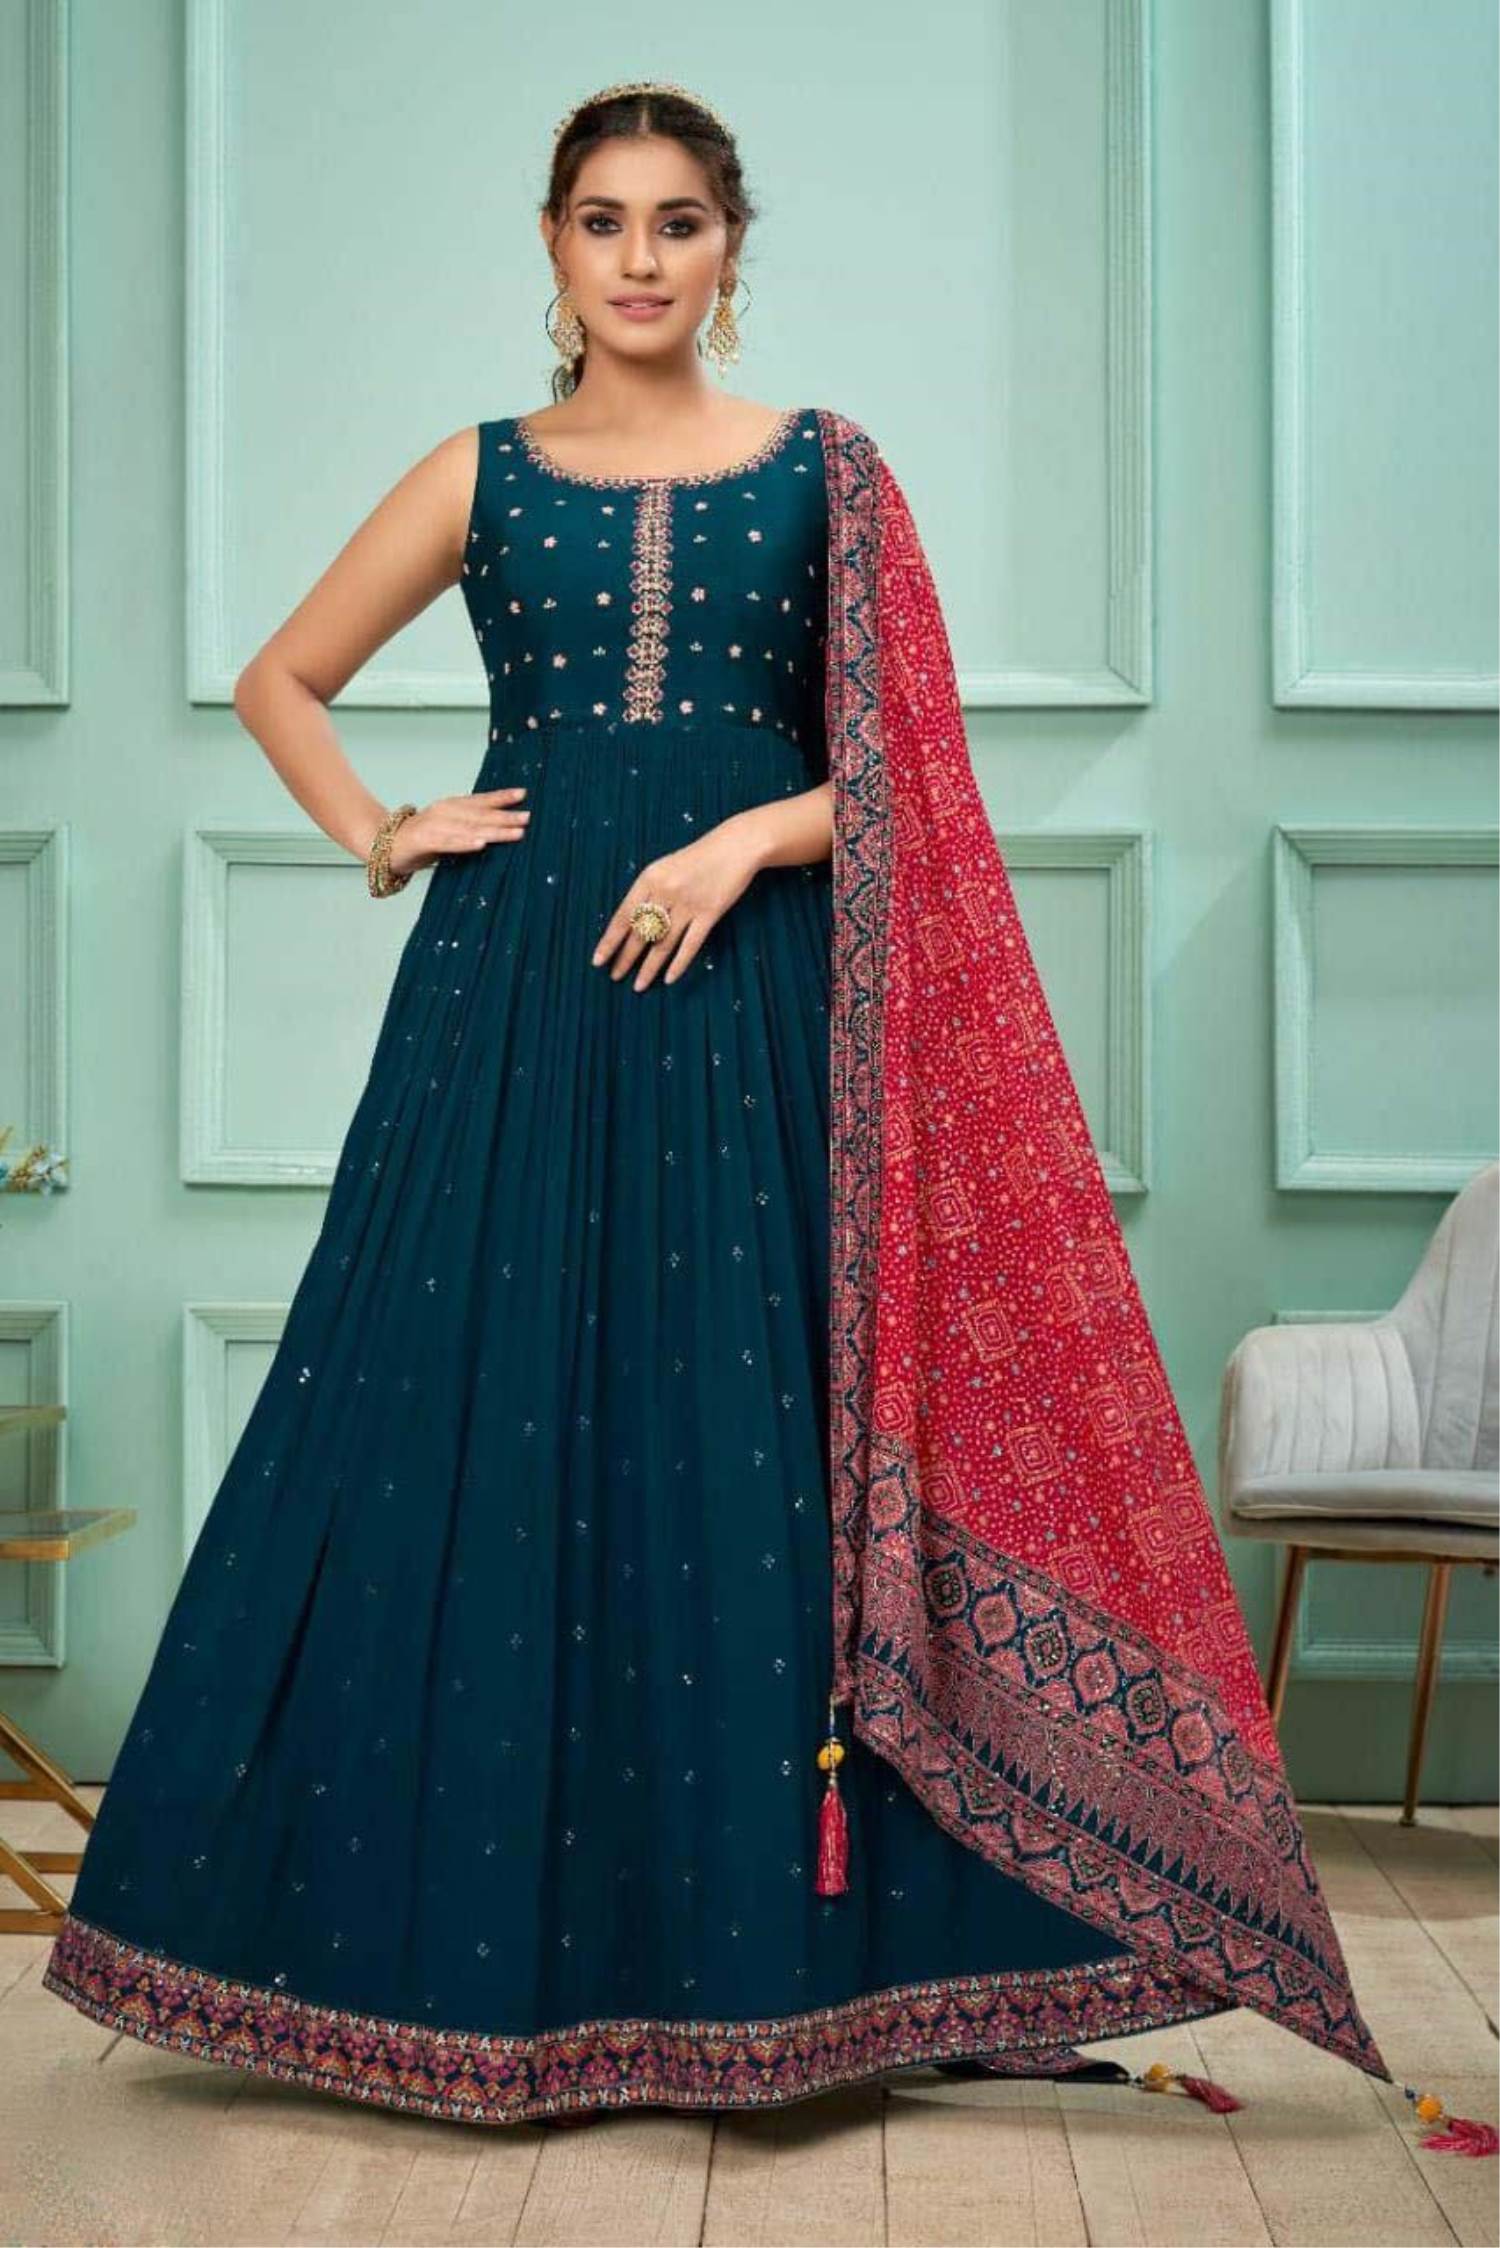 Buy Ladies Unstitched Dress Material Online|Navy Blue and Peacock Green  Embroidered Unstitched Dress Material|Lovely Wedding Mall